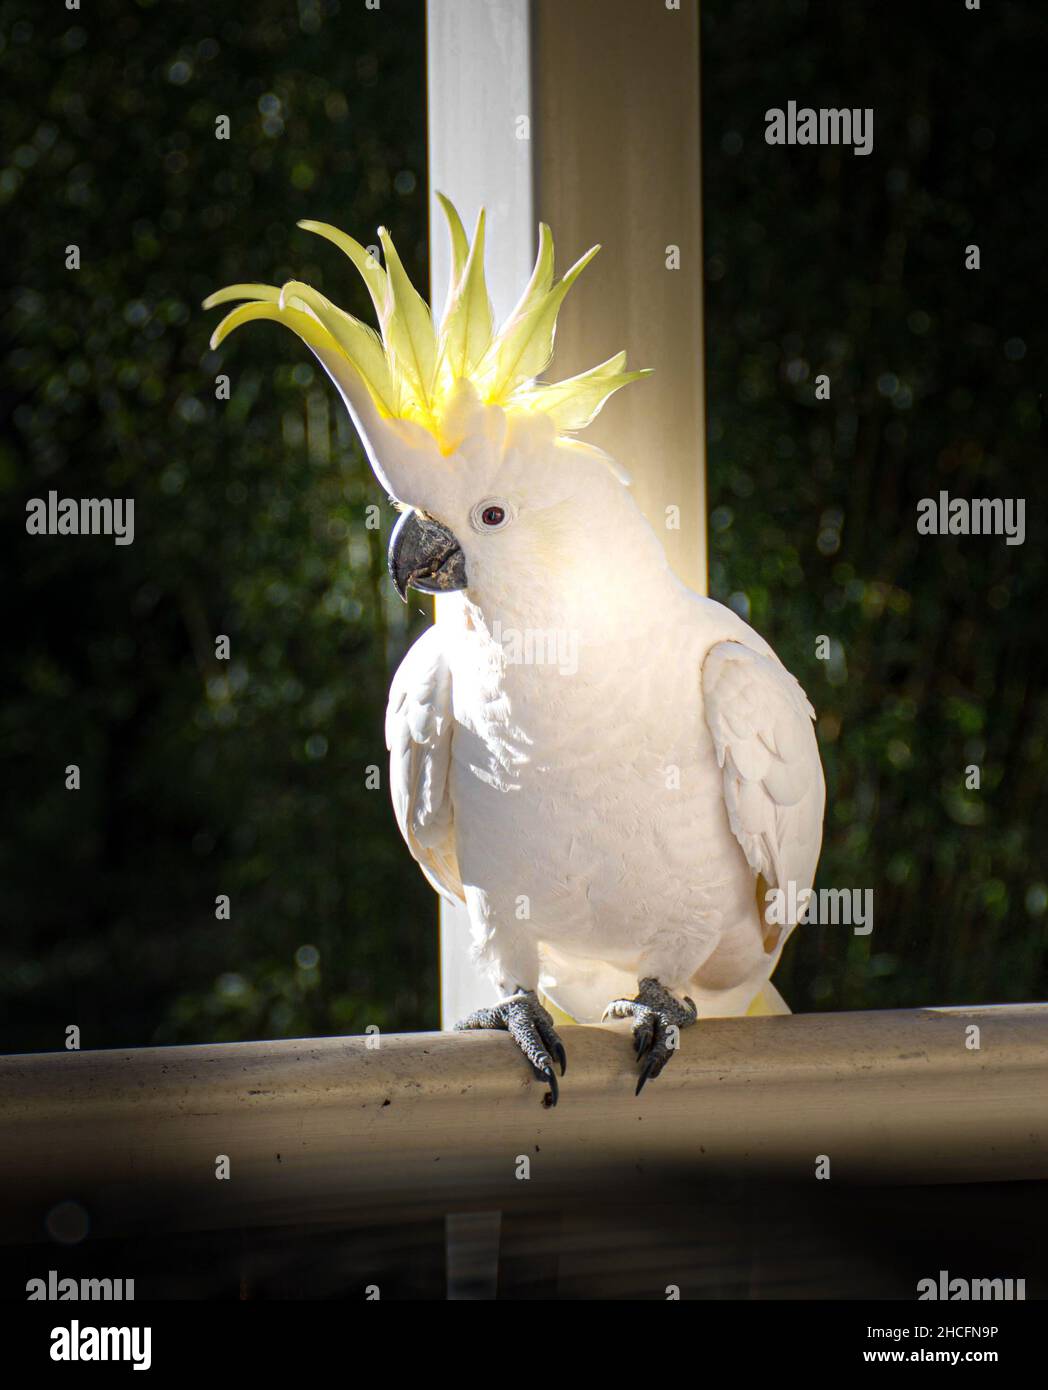 Yellow Crested Cockatoo perched on a fence in a garden in Surfers Paradise, Australia Stock Photo